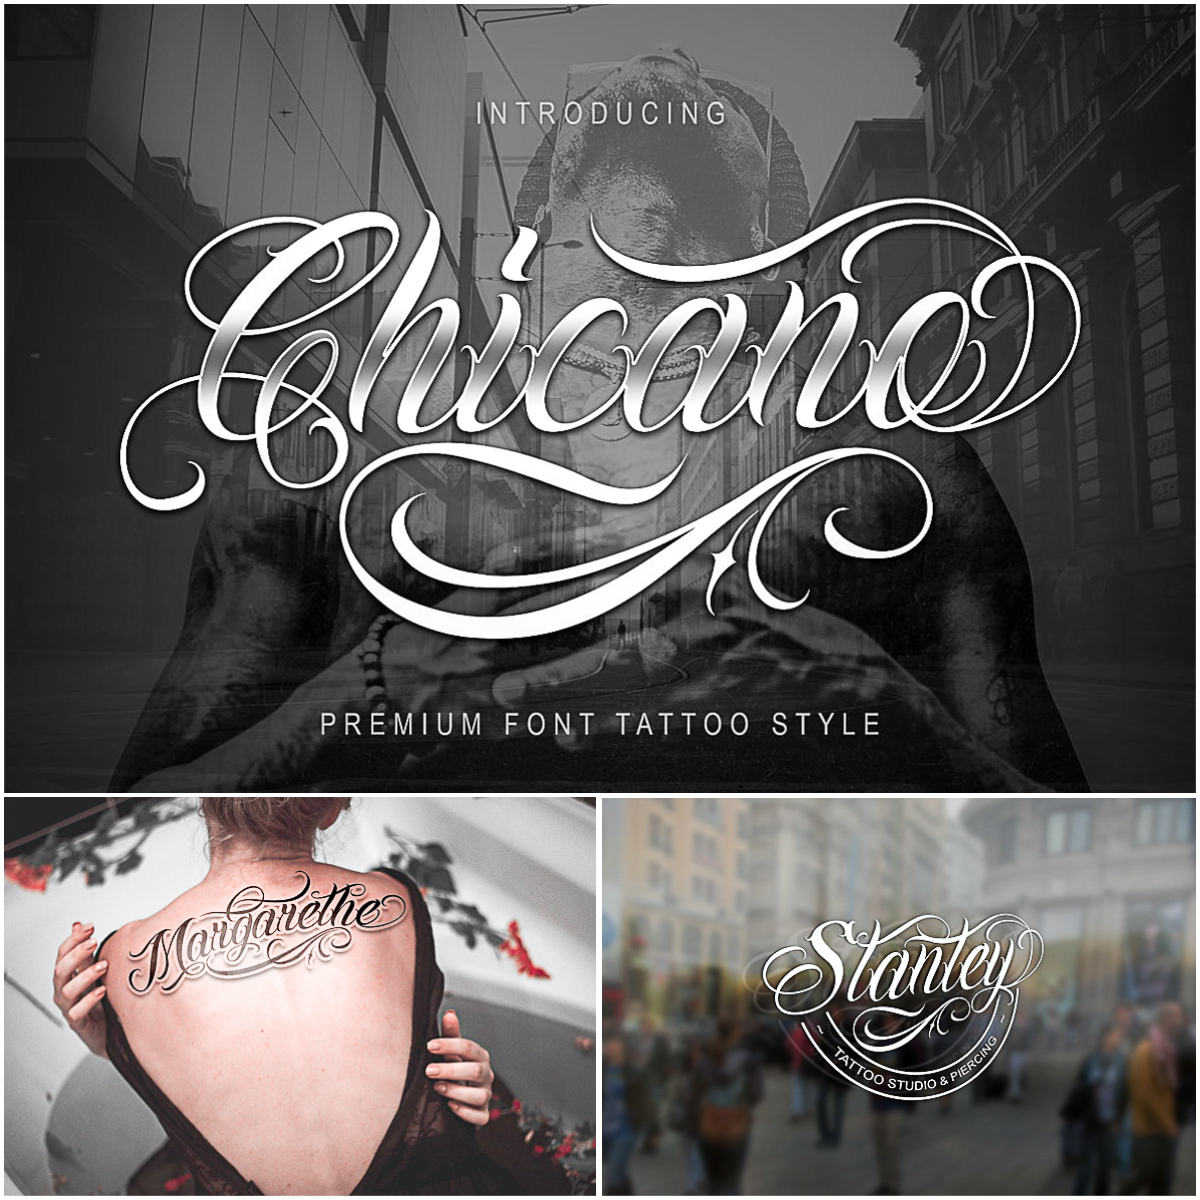 Chicano tattoo vintage concept Royalty Free Vector Image